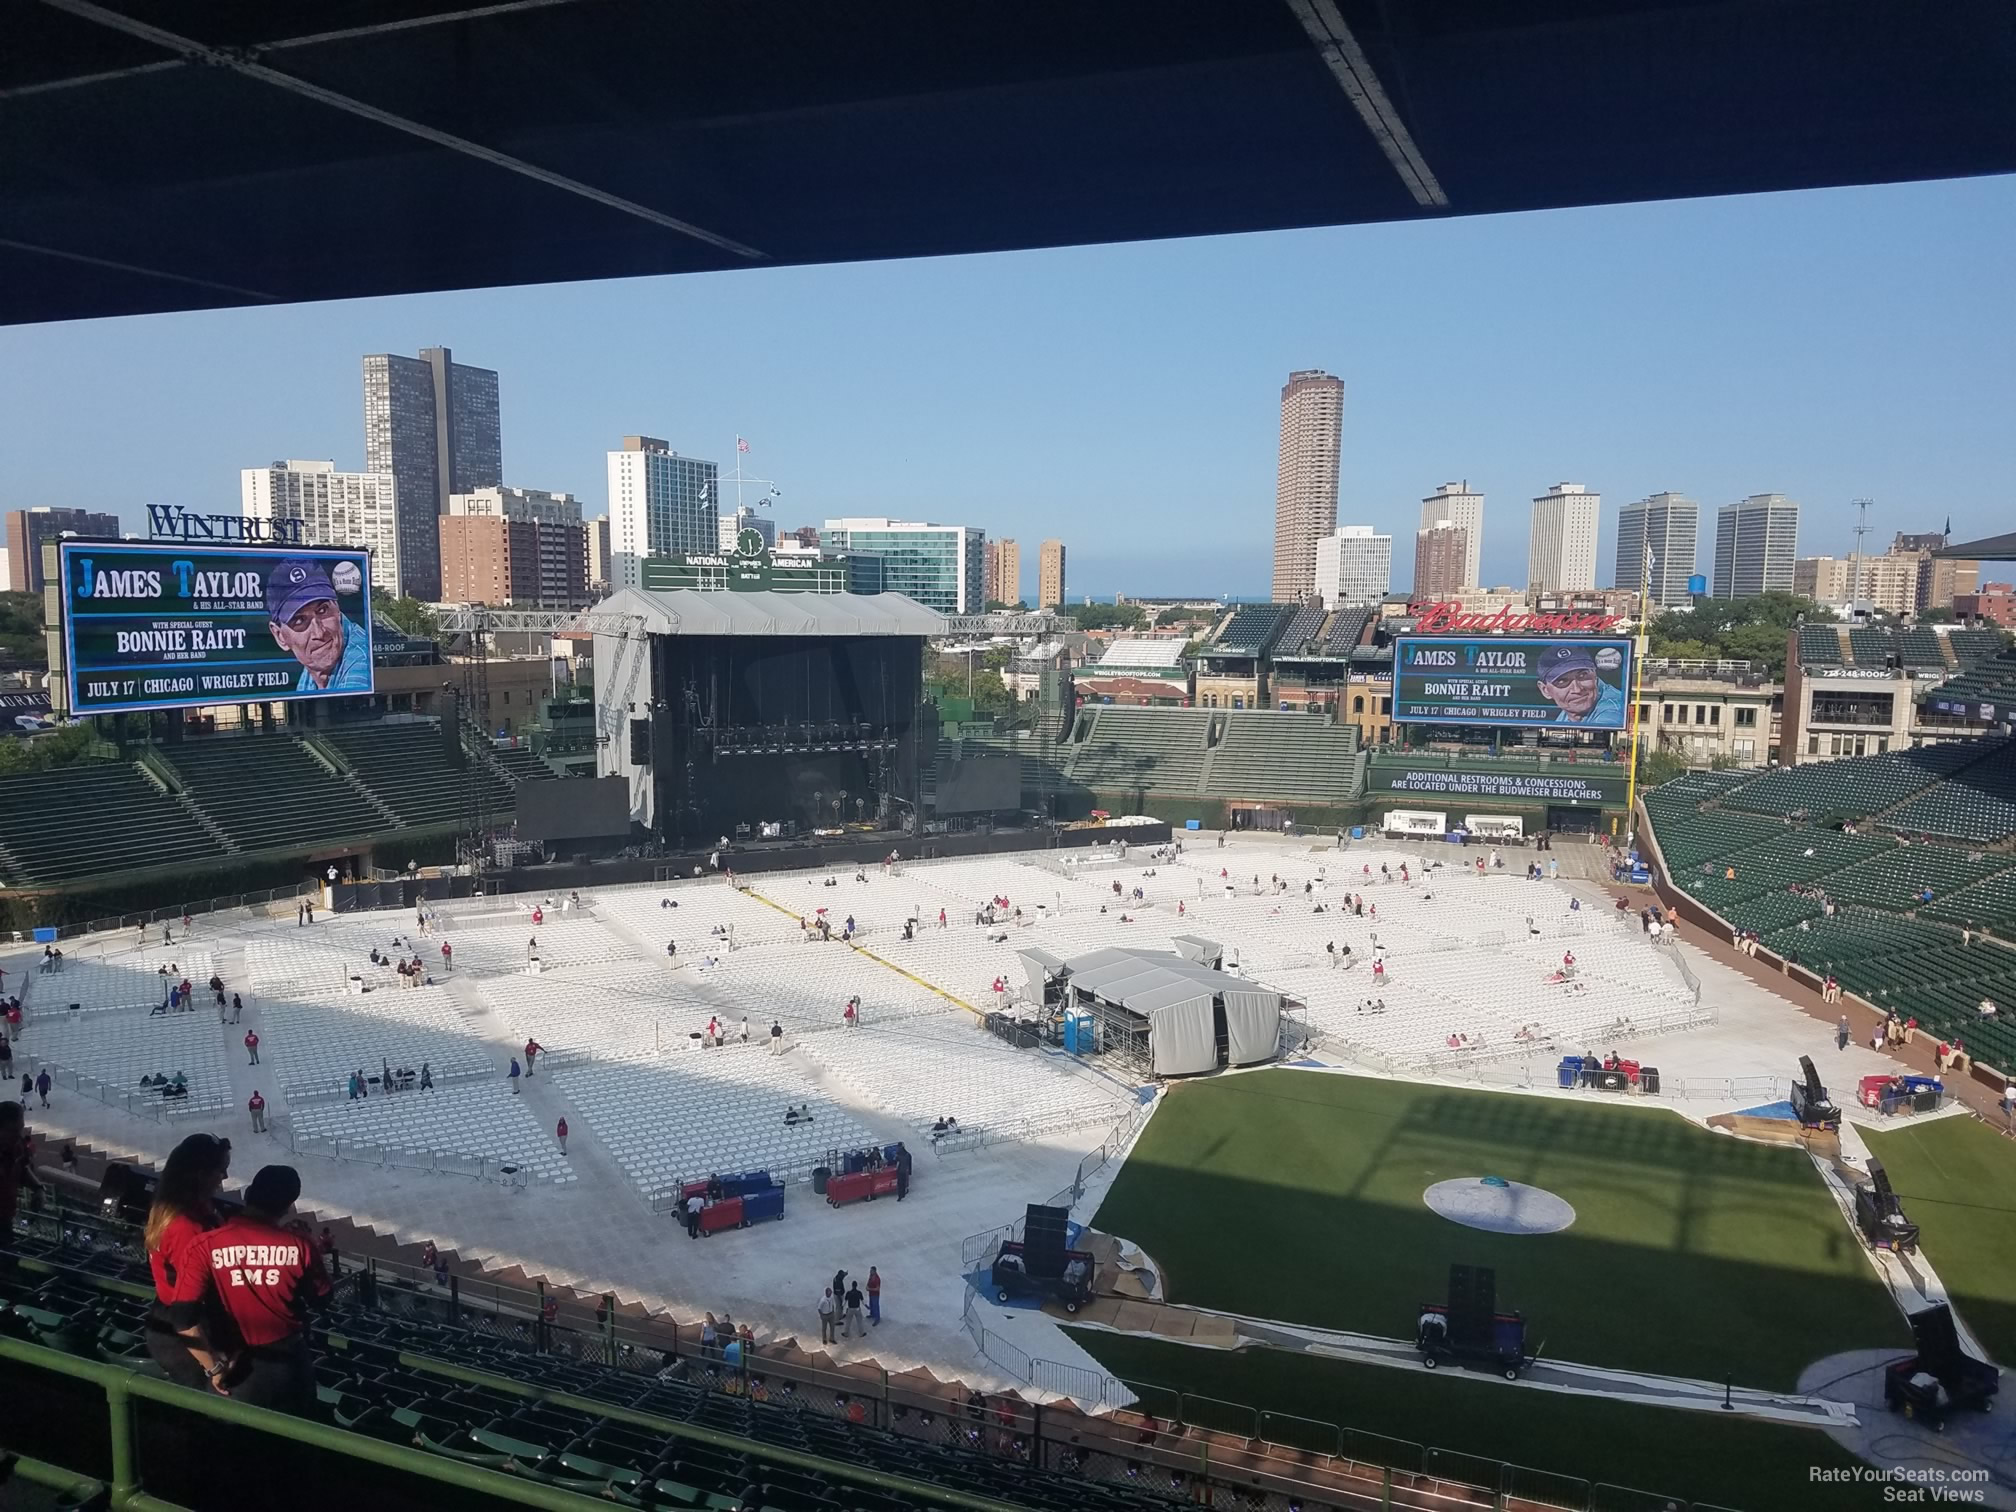 Section 412 at Wrigley Field for Concerts